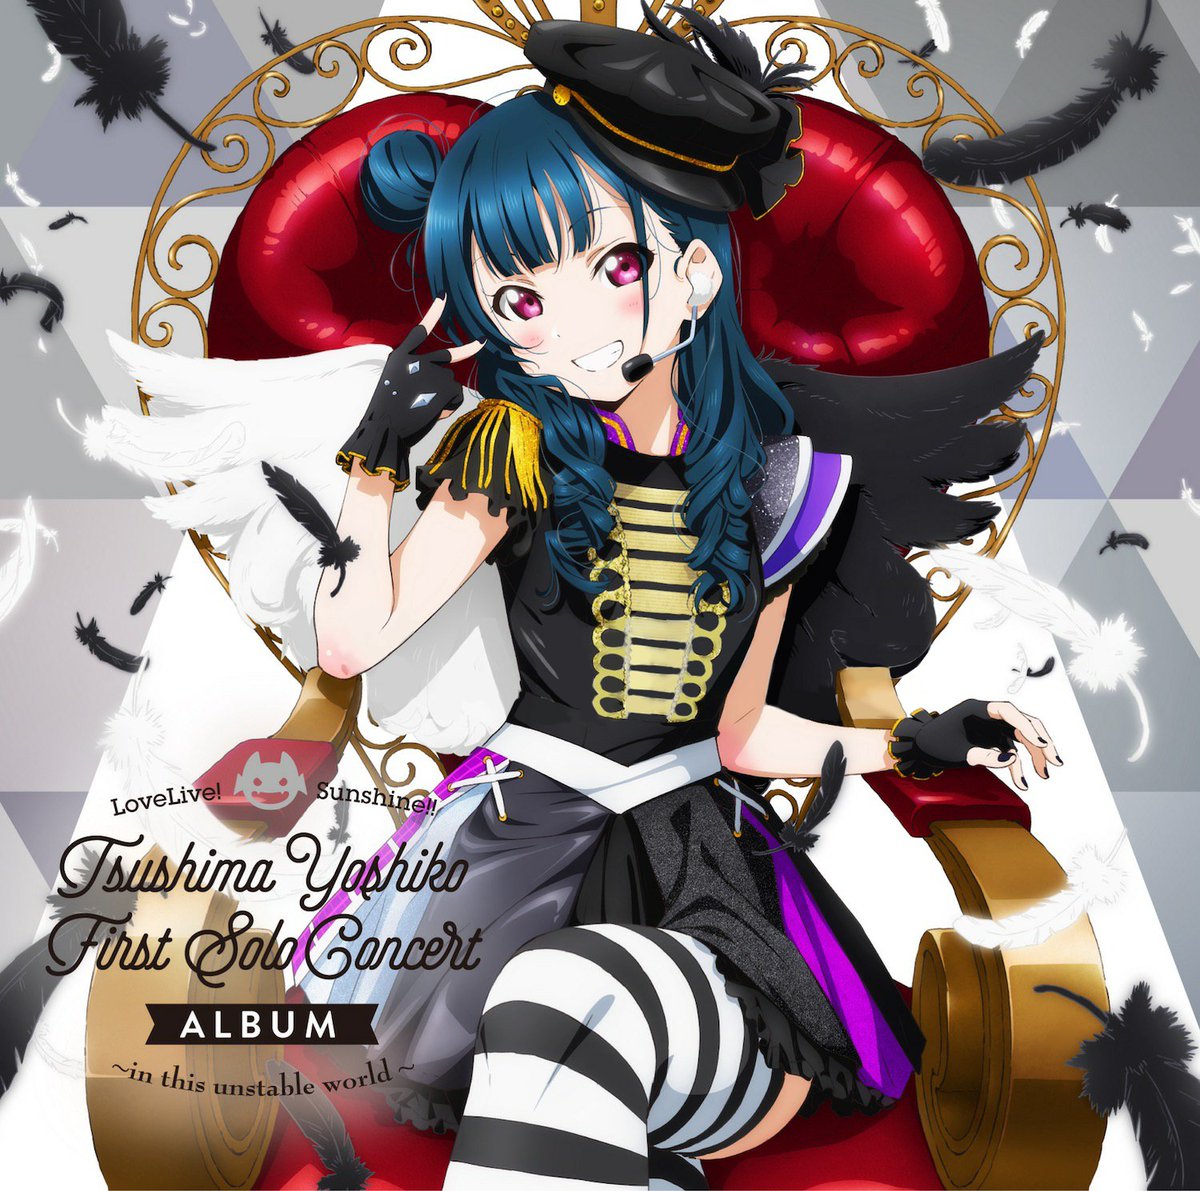 Cover for『Yoshiko Tsushima (Aika Kobayashi) from Aqours - in this unstable world』from the release『LoveLive! Sunshine!! Tsushima Yoshiko First Solo Concert Album ～in this unstable world ～』